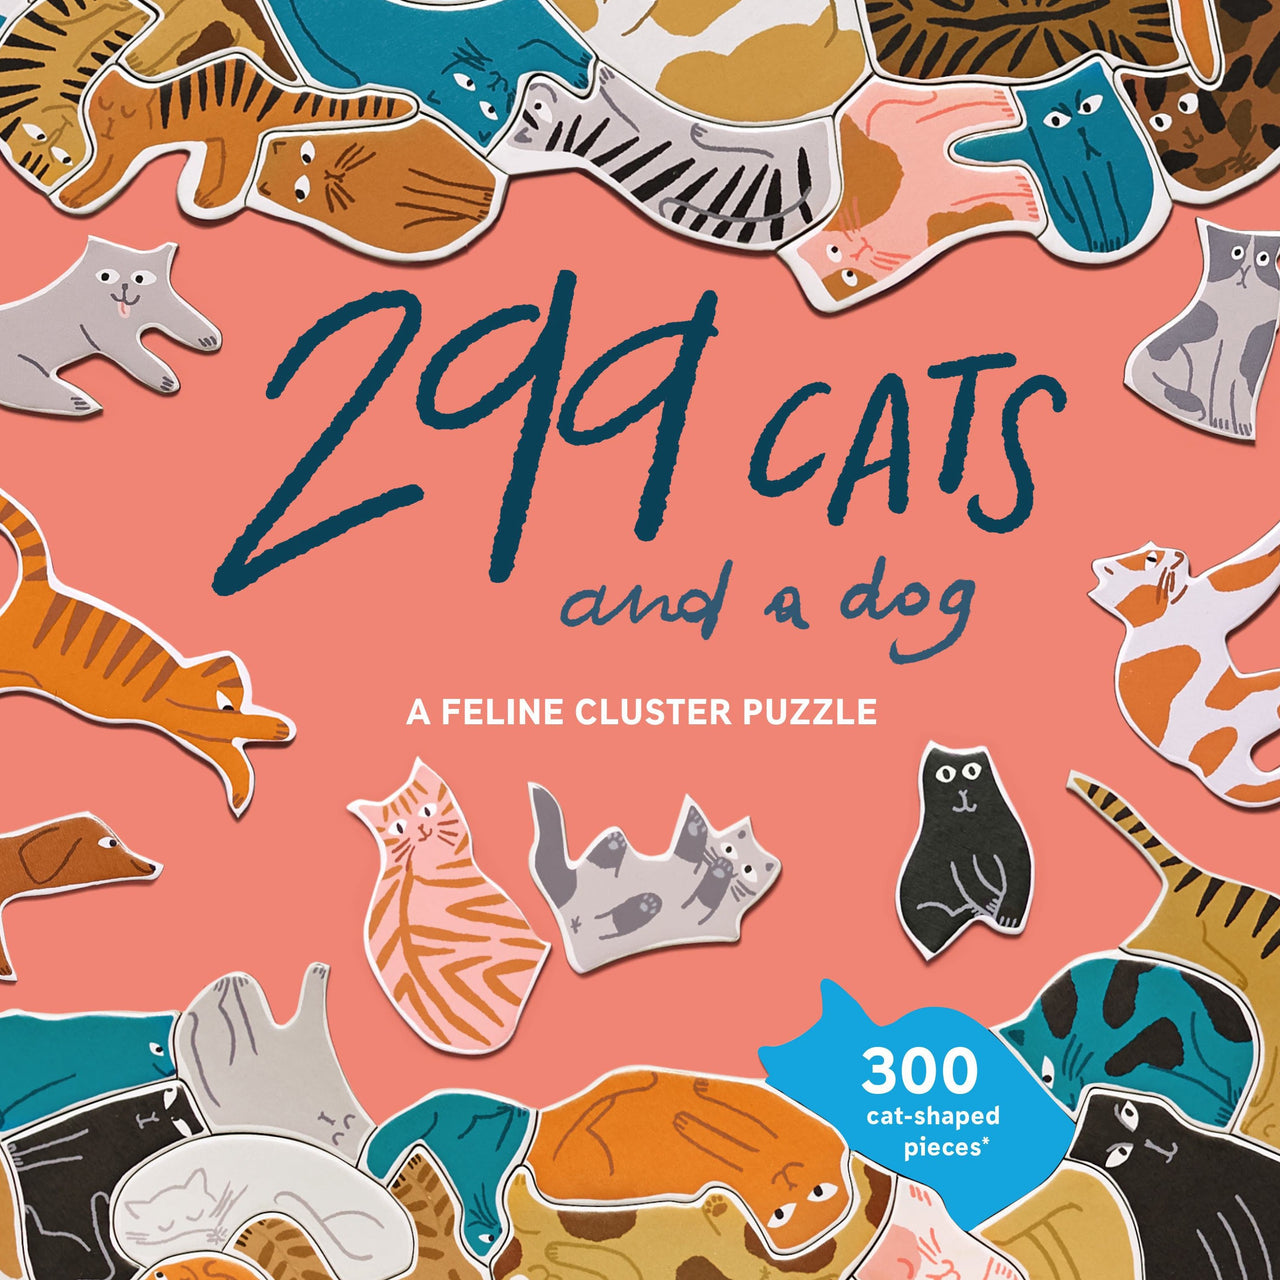 299 Cats (and a dog) 300 Piece Puzzle